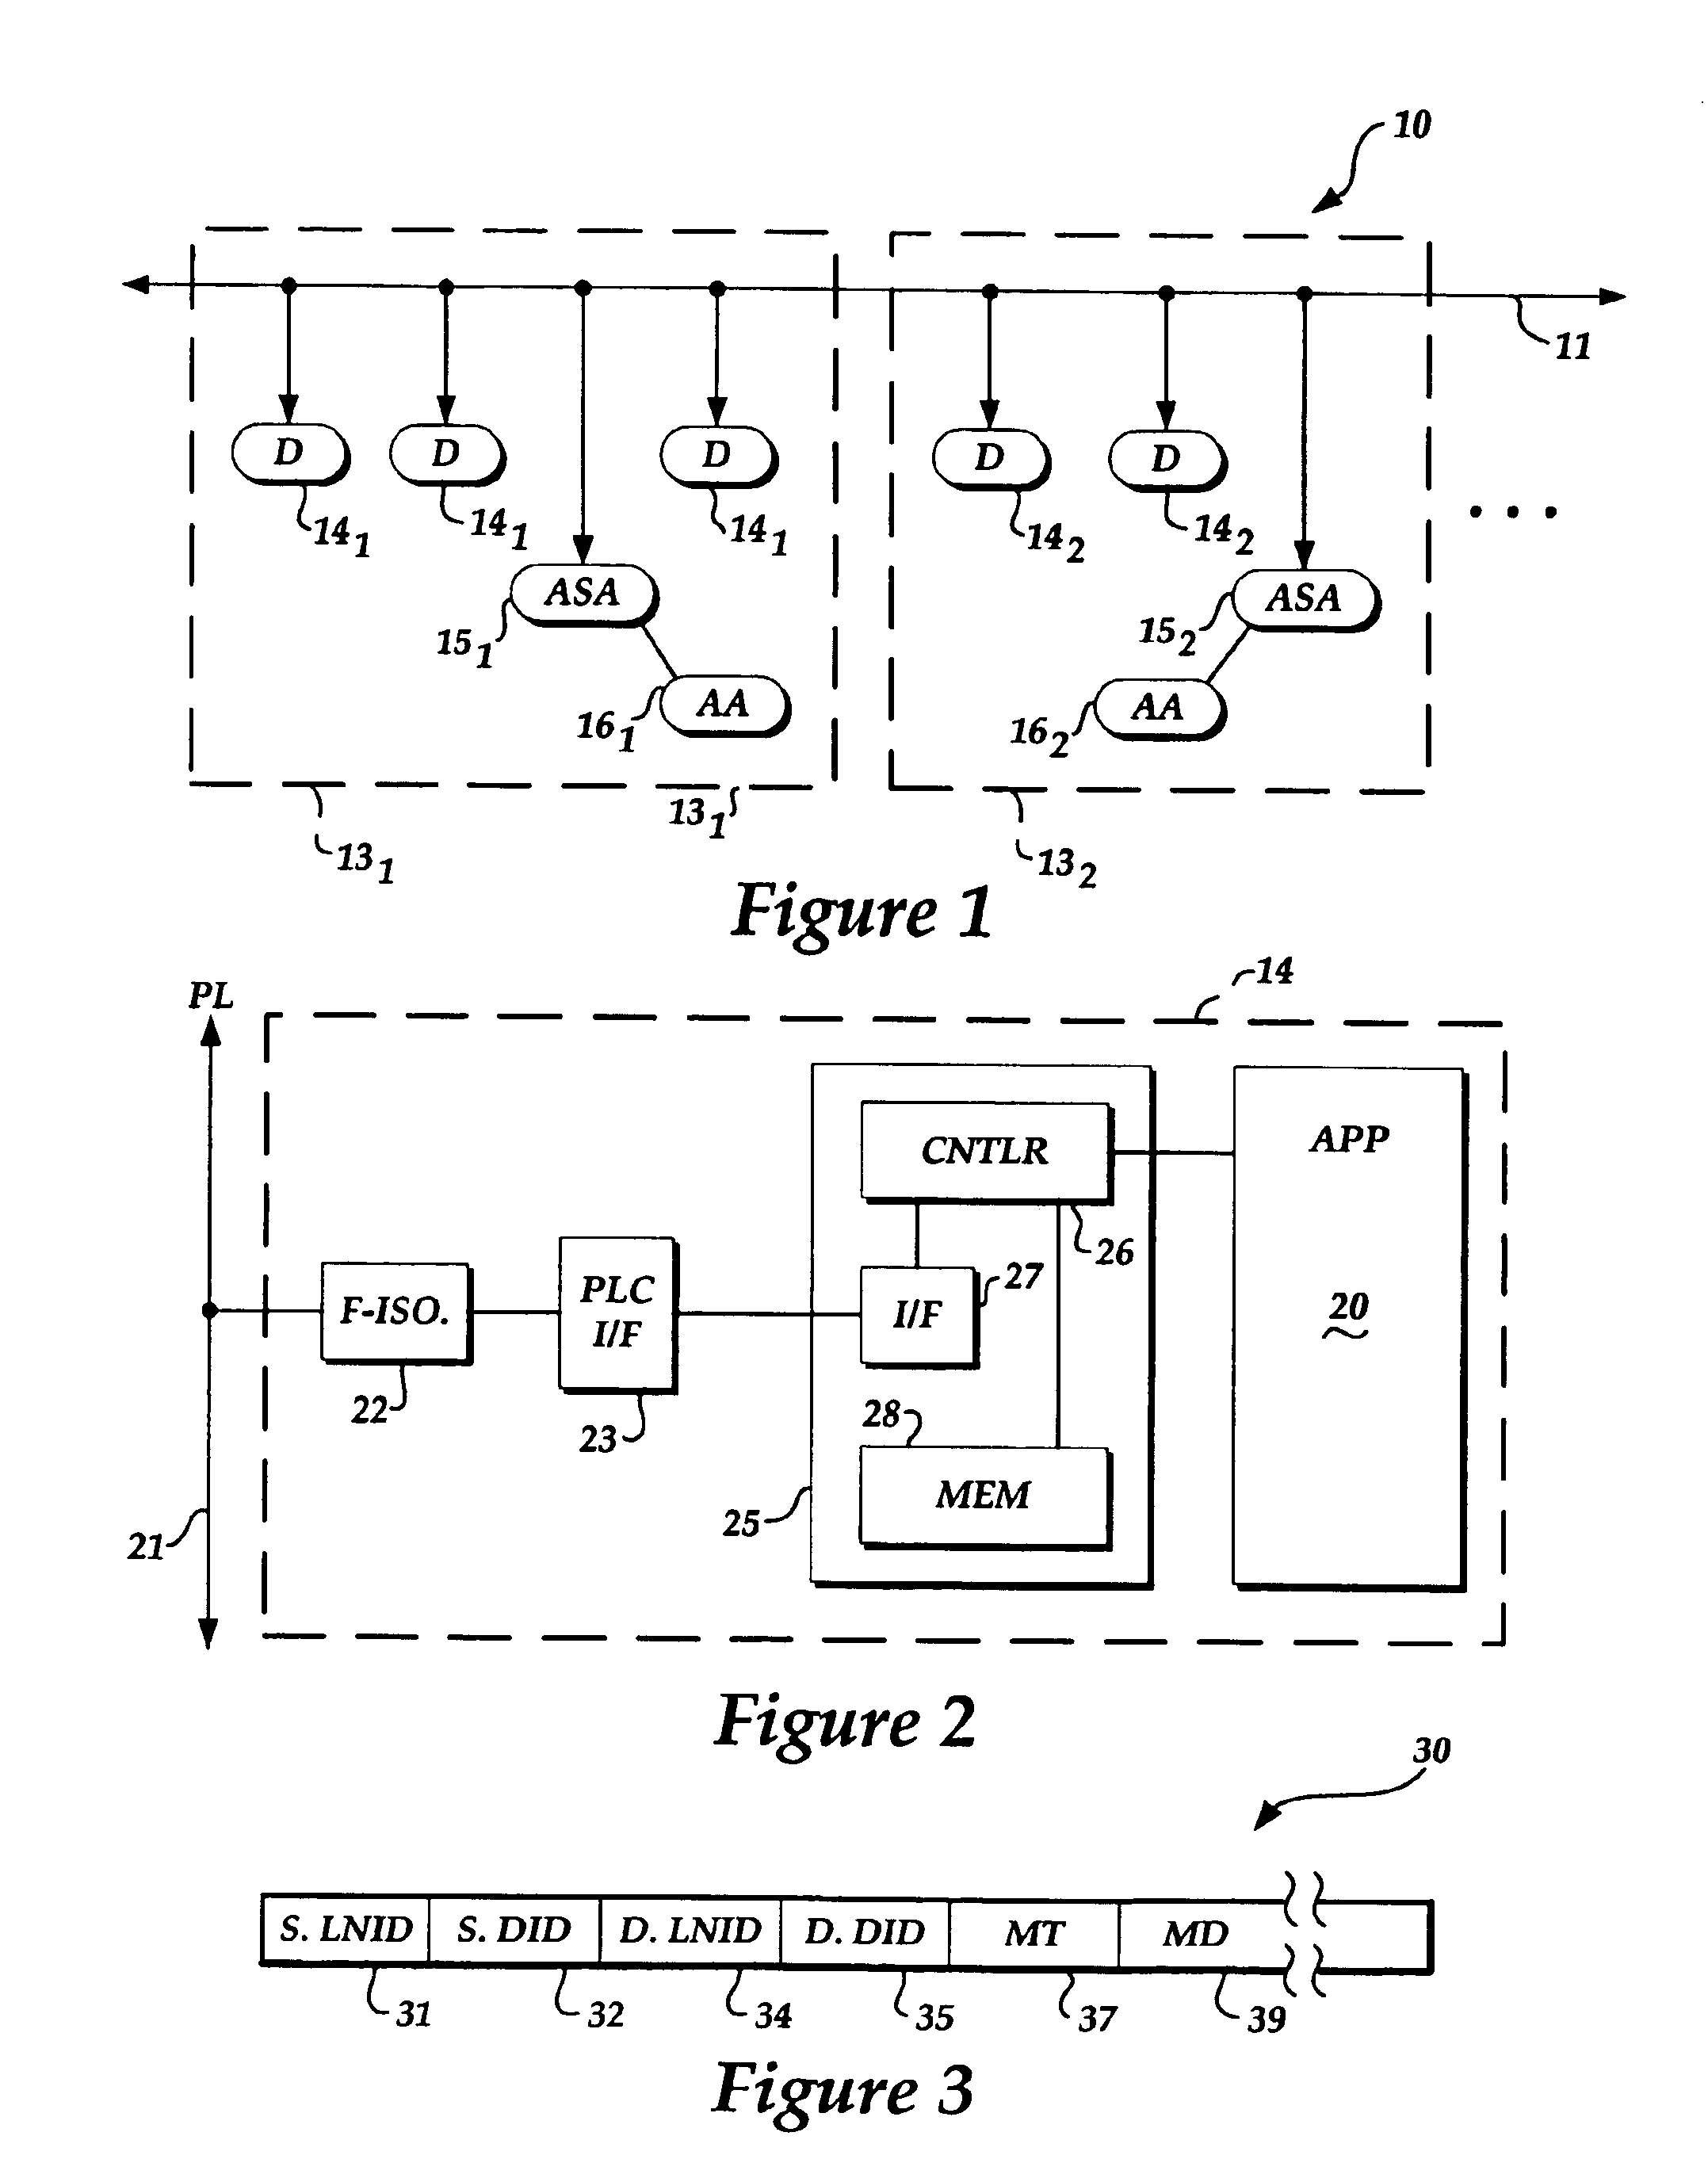 System for networked component address and logical network formation and maintenance